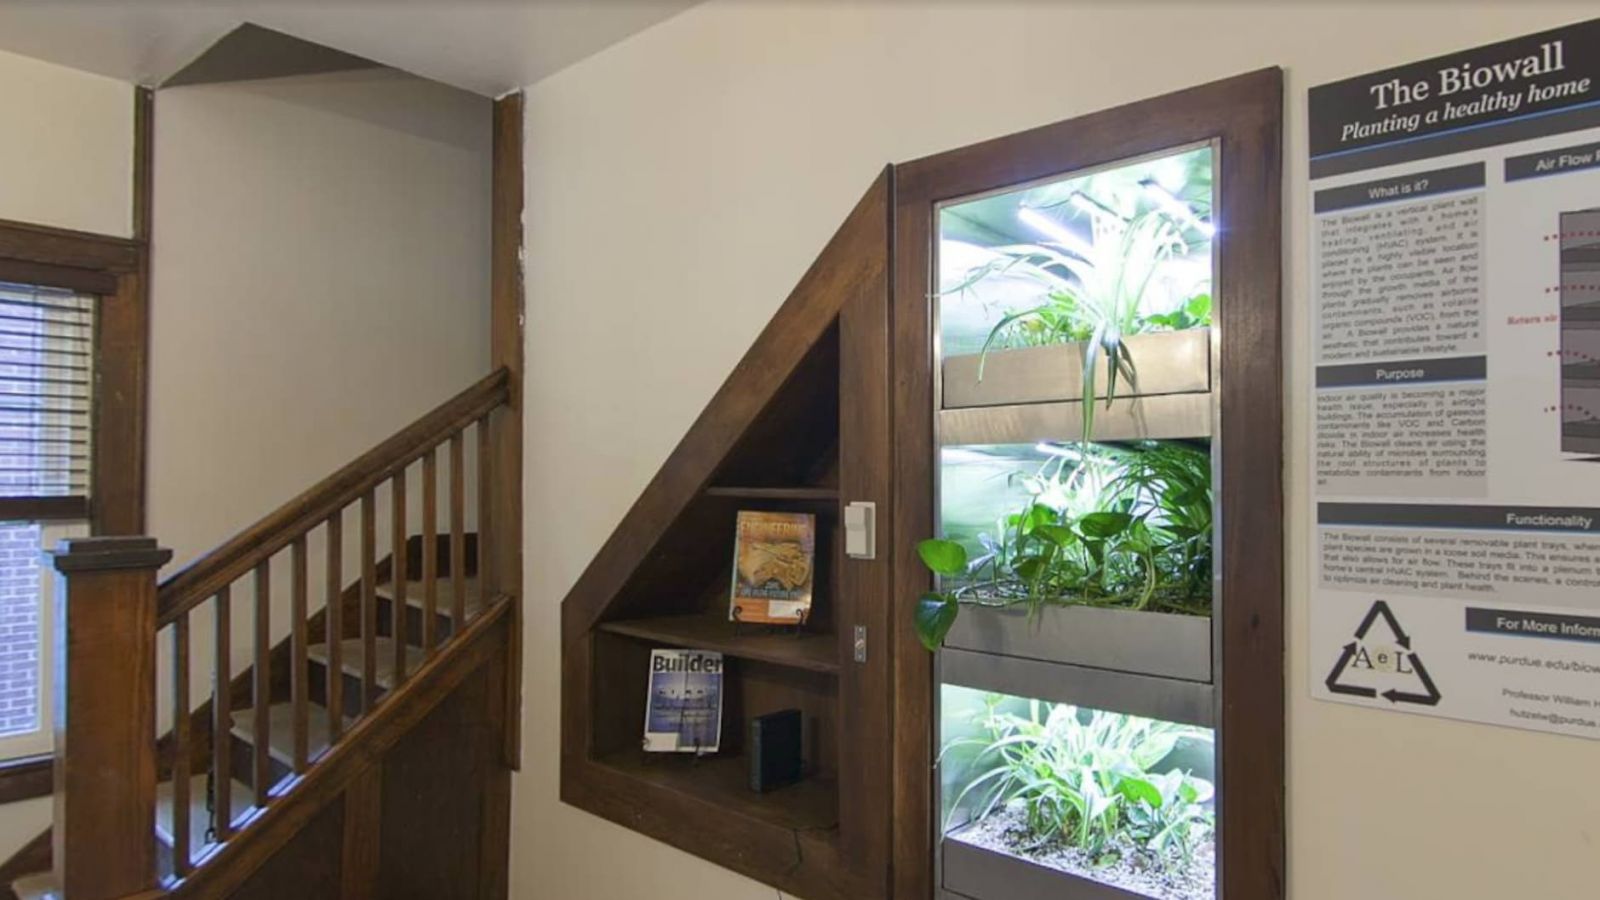 Purdue University researchers installed the Biowall in the ReNEWW house to monitor the performance of the biofilter, the health of the plants present and comfort of residents.